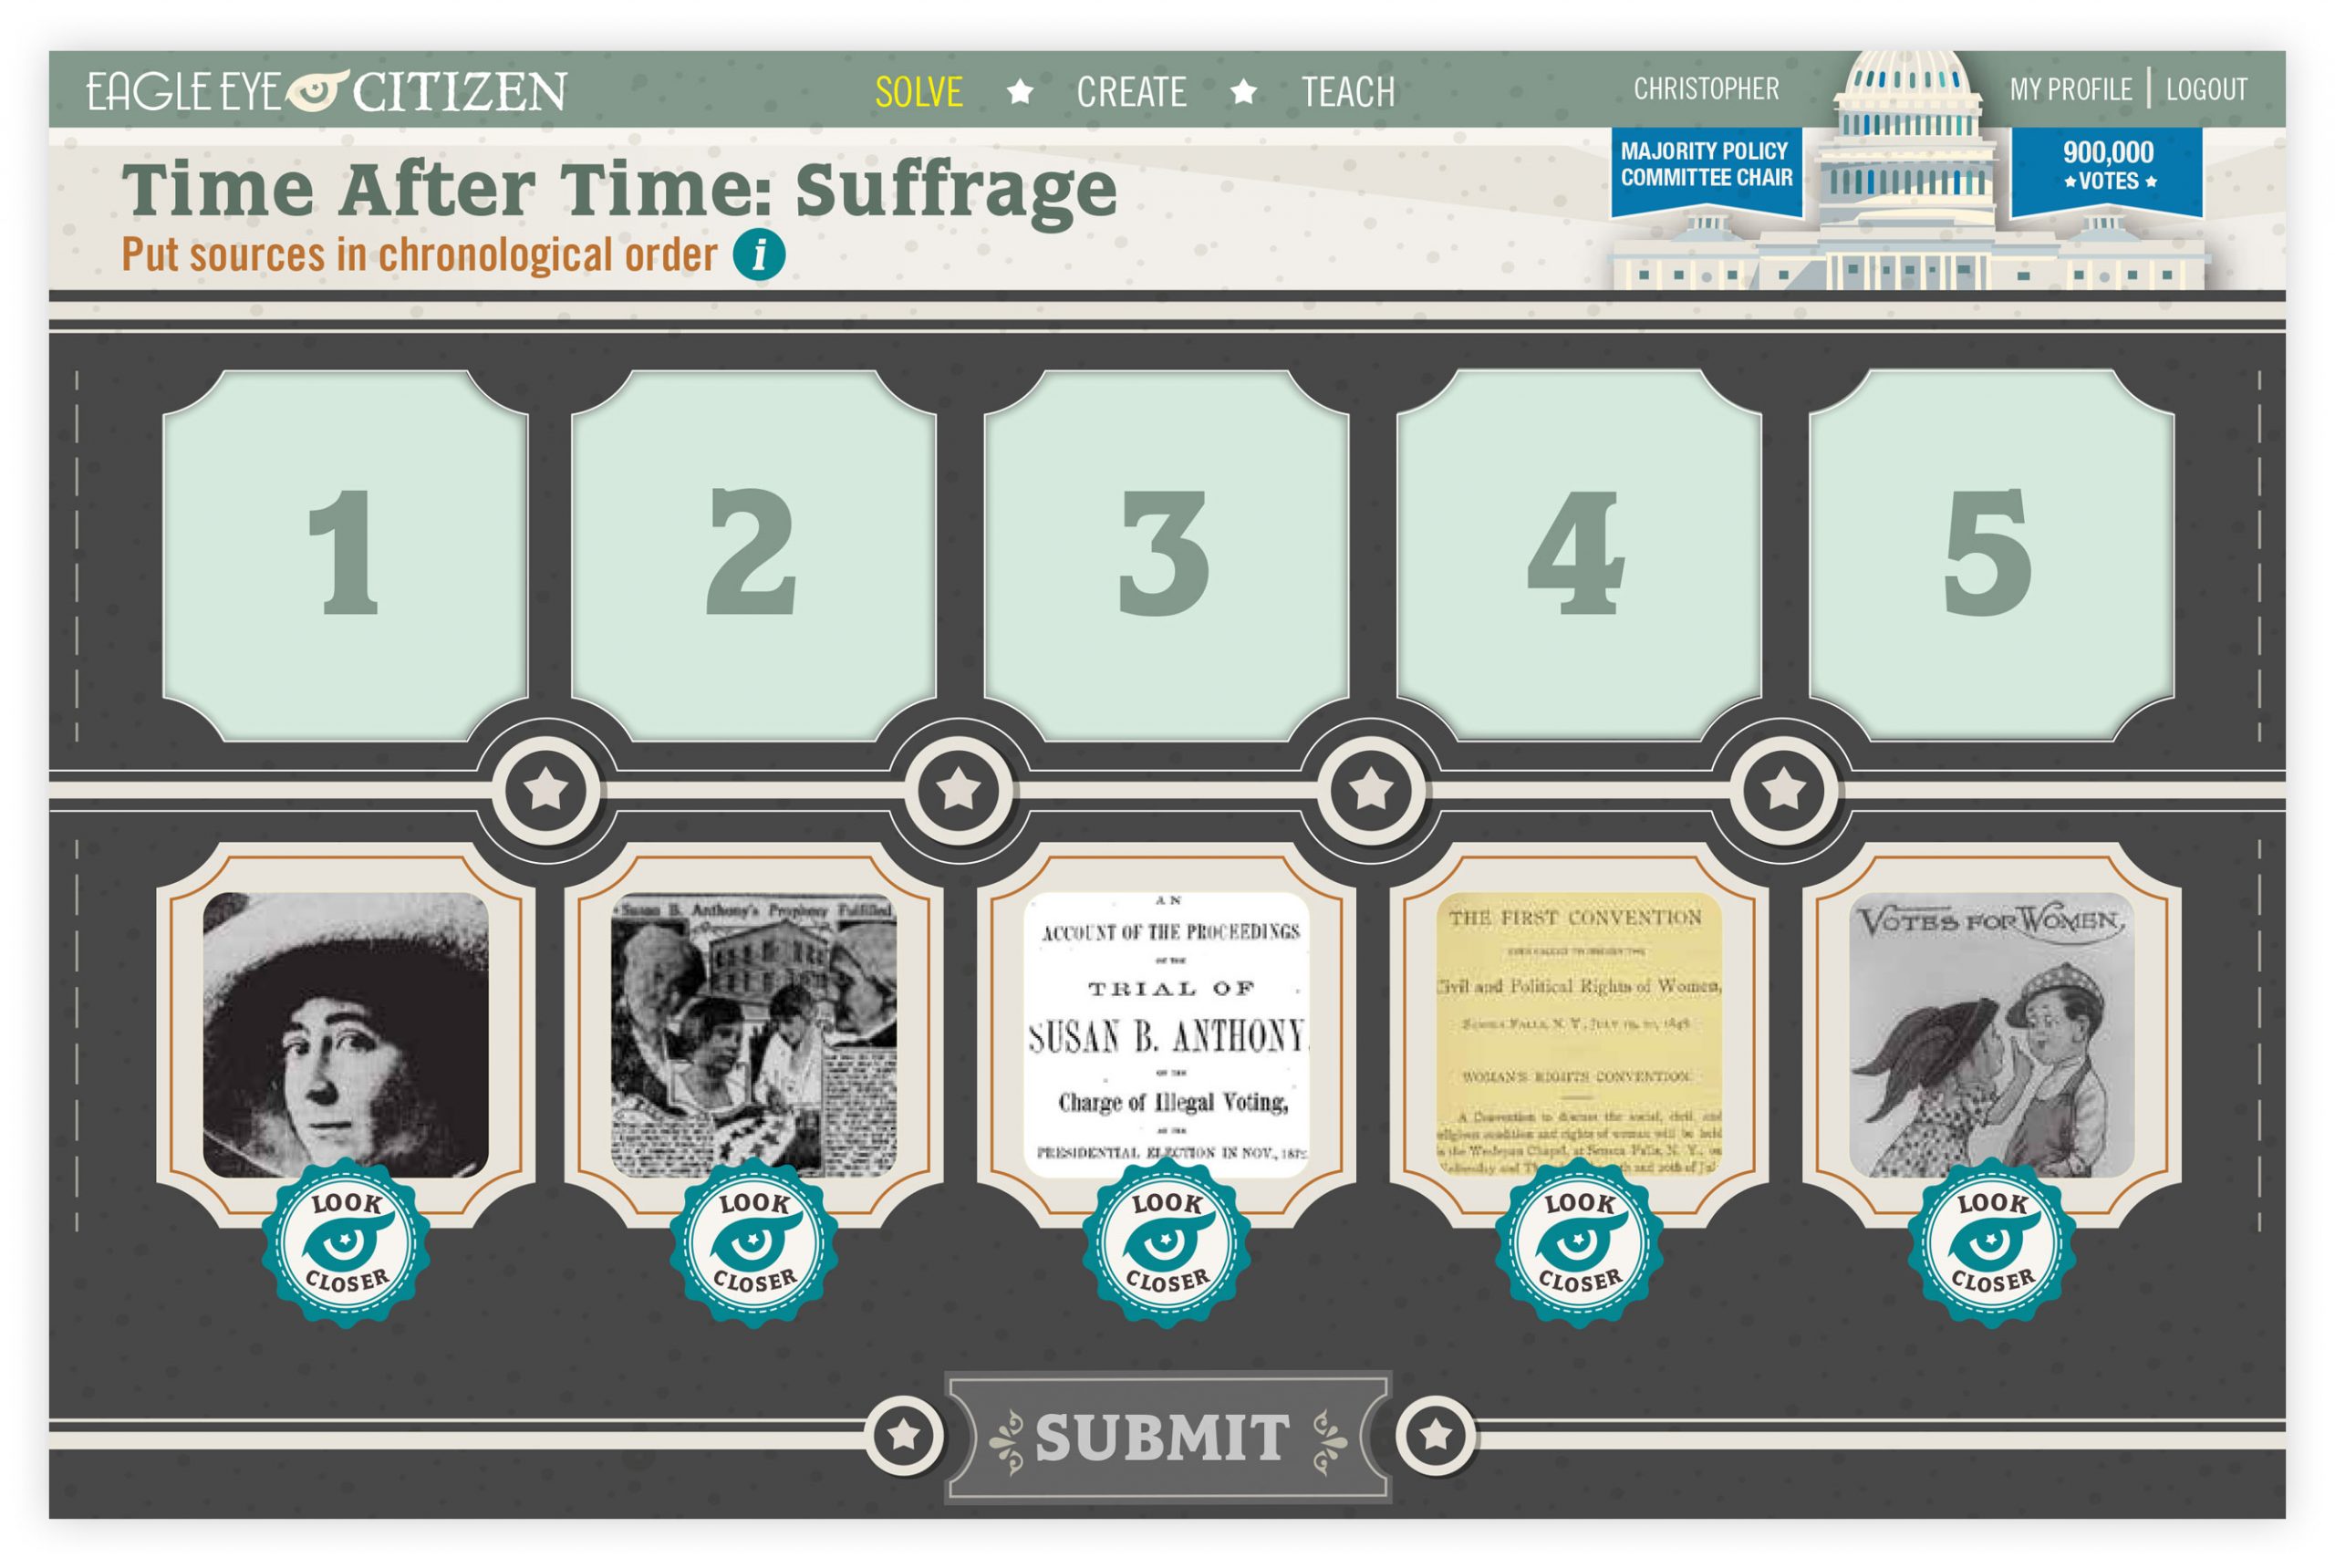 Screengrab of a Time After Time challenge from the Eagle Eye Citizen website for the topic of Suffrage.